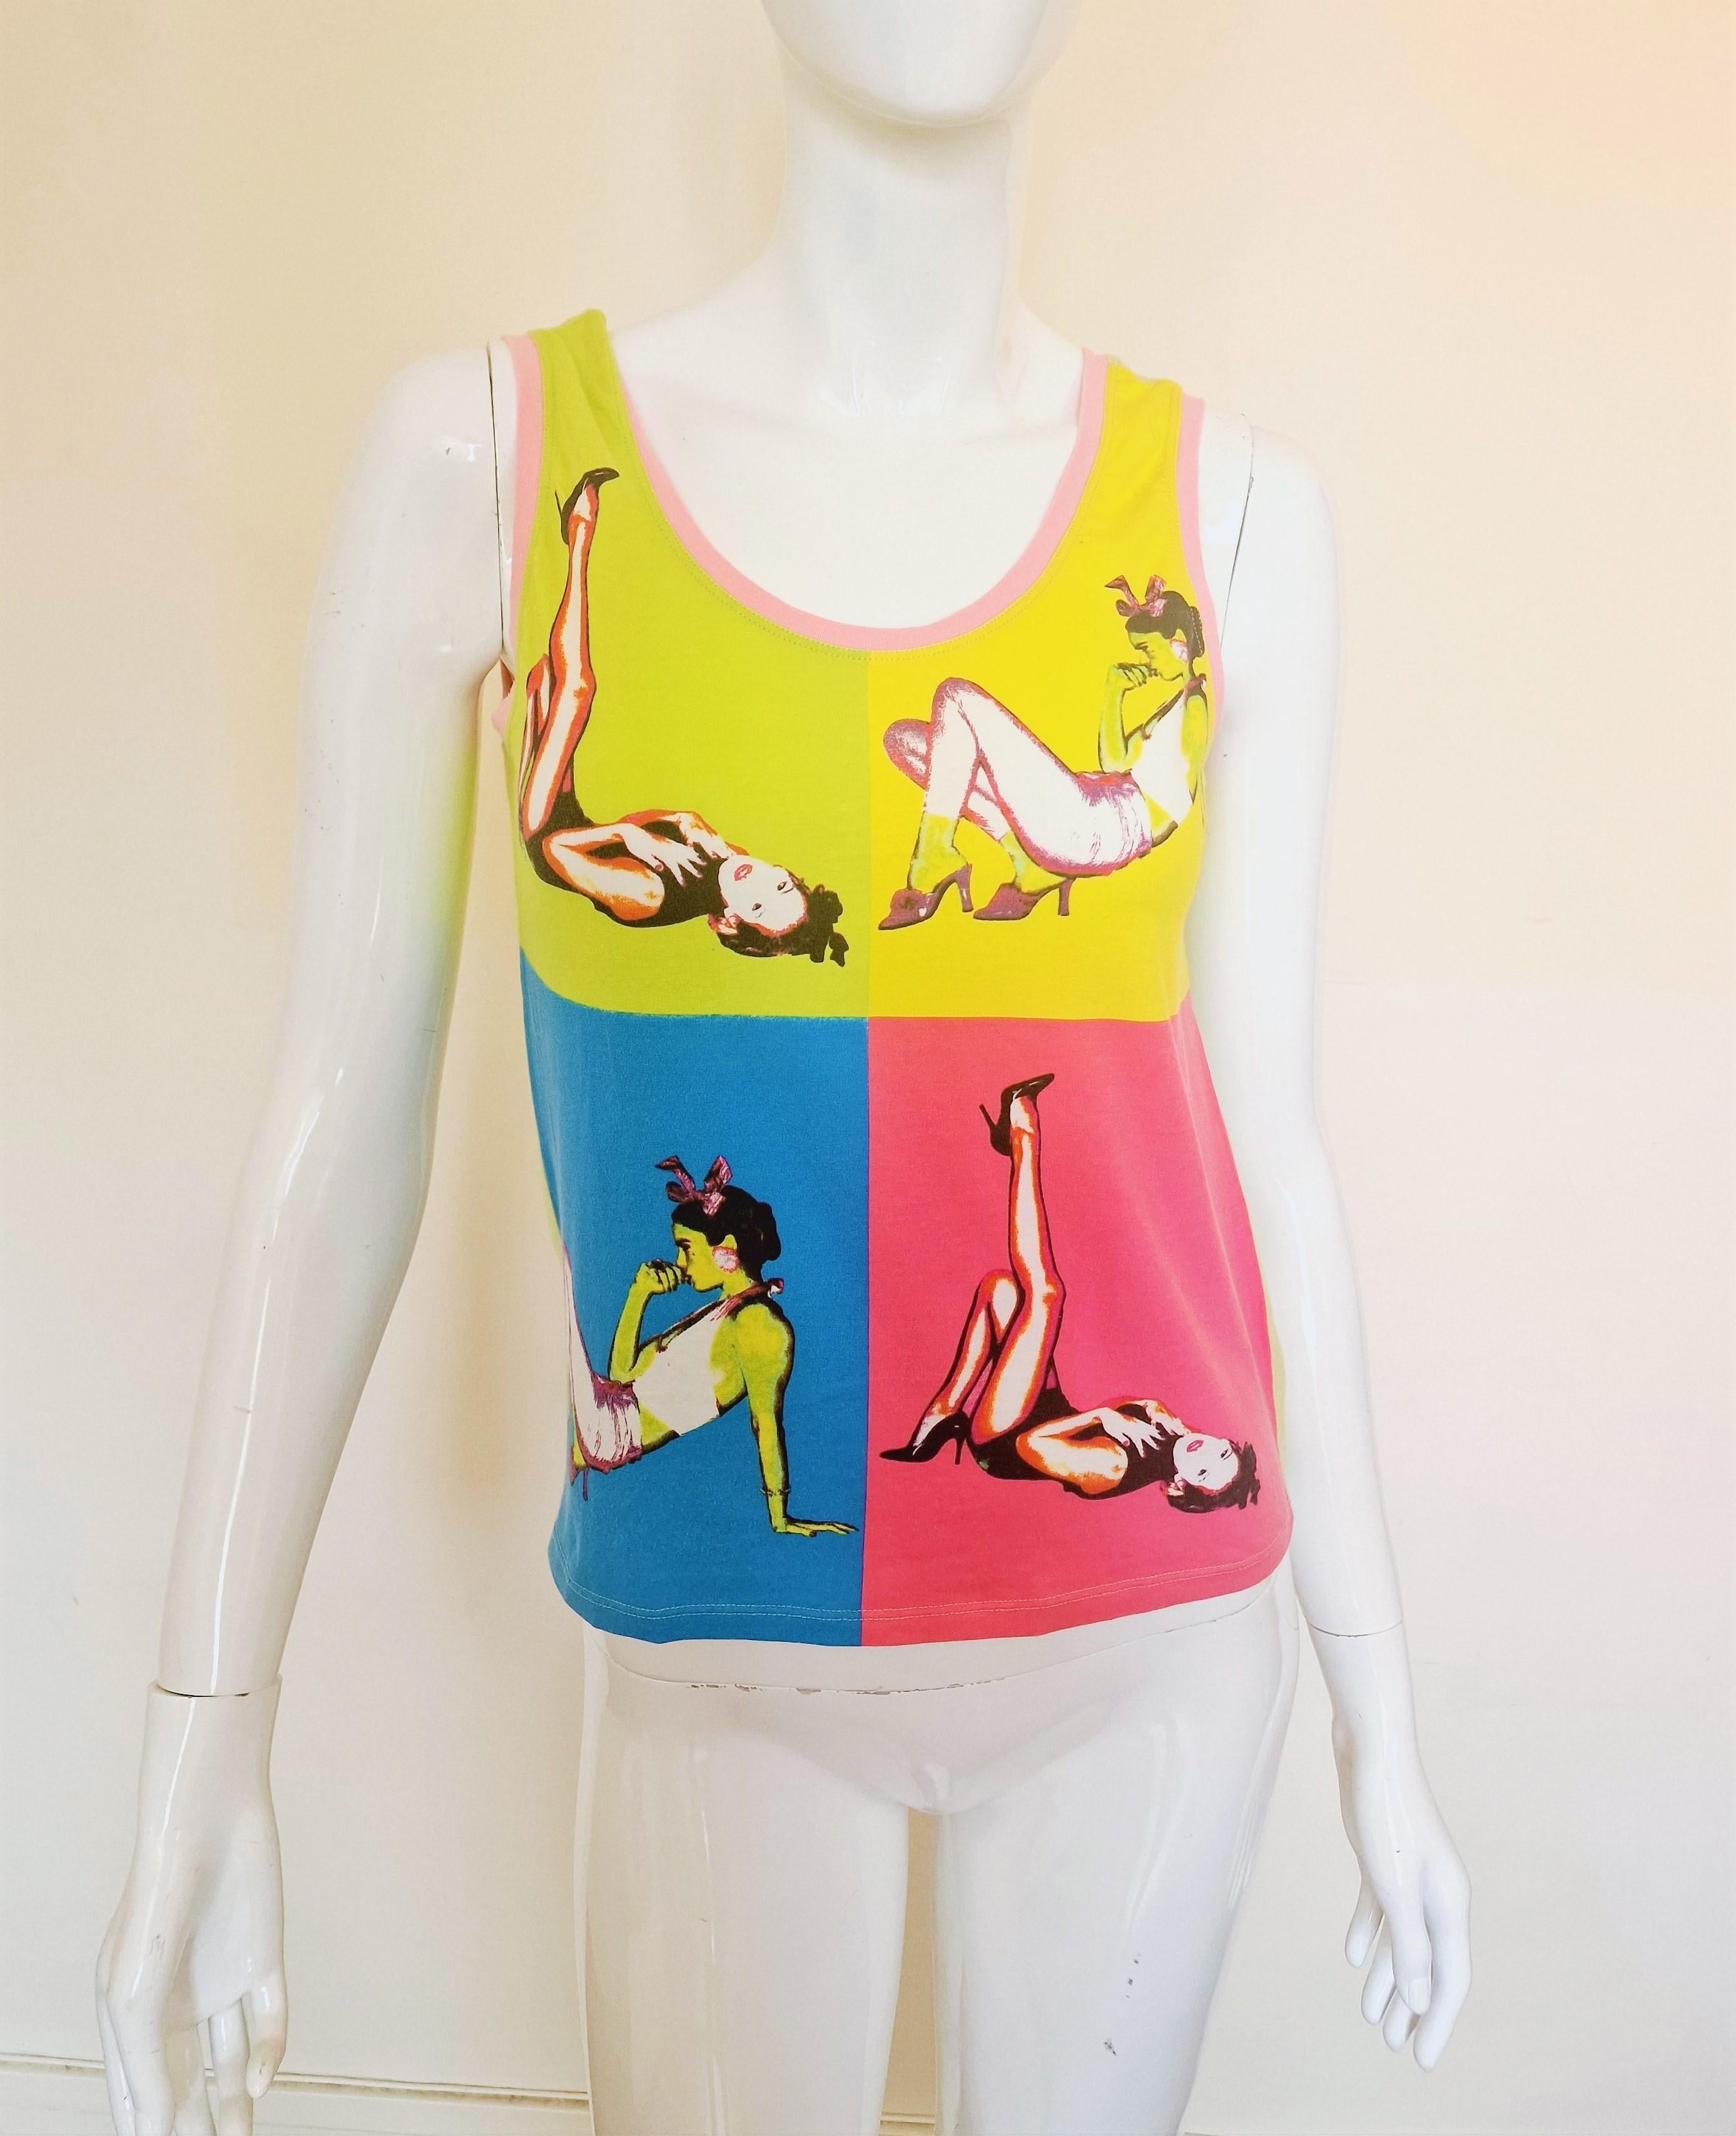 Lollipop pin up girl top by Versace!
From the Spring Summer 2004 collection! 
Donatella vibe :) 

VERY GOOD condition!

SIZE
Marked size: IT44. 
Women: large.
Men: small/medium.
Length: 53 cm / 20.9 inch
Bust: 43 cm / 16.9 inch

100% cotton.
Made in